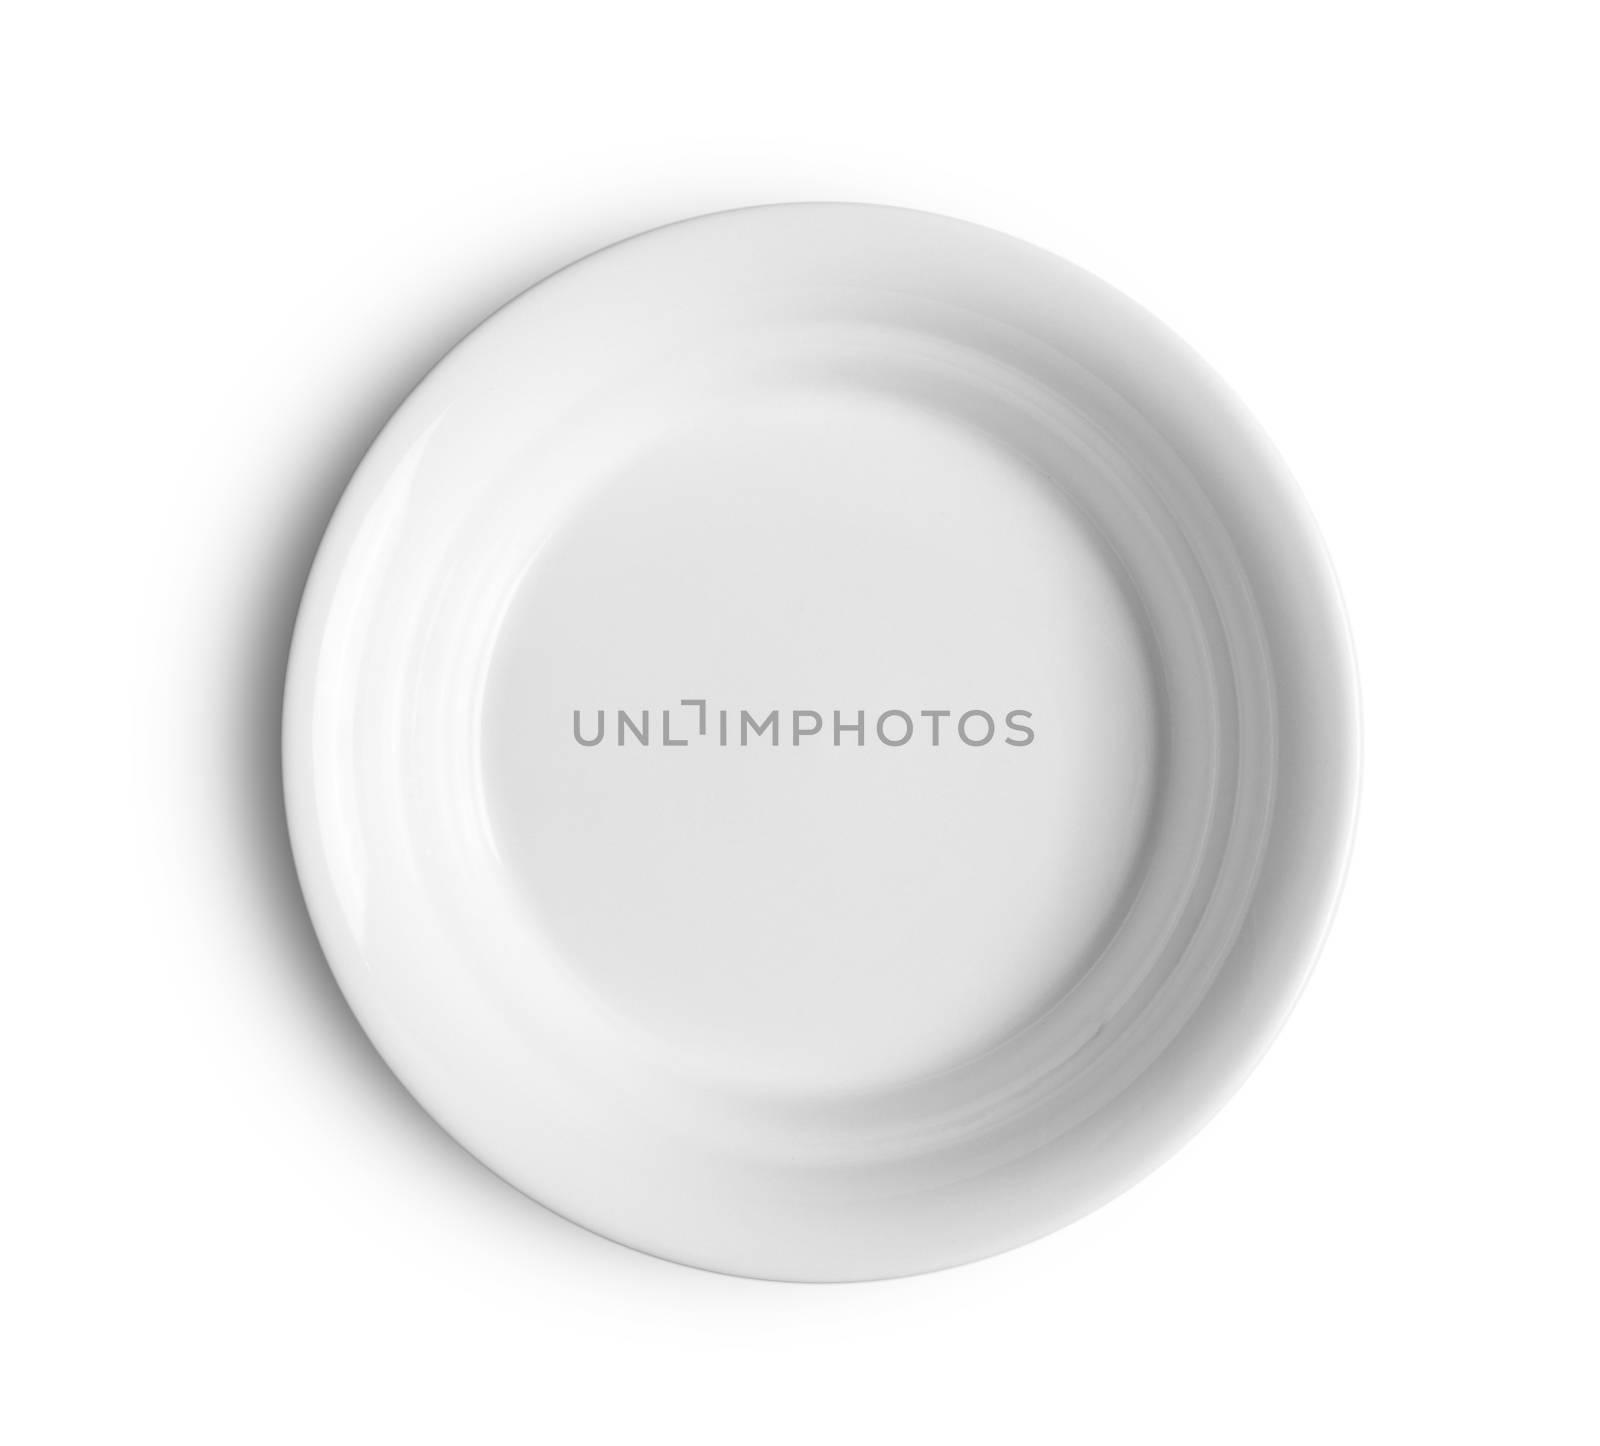 white plate on white background by sommai